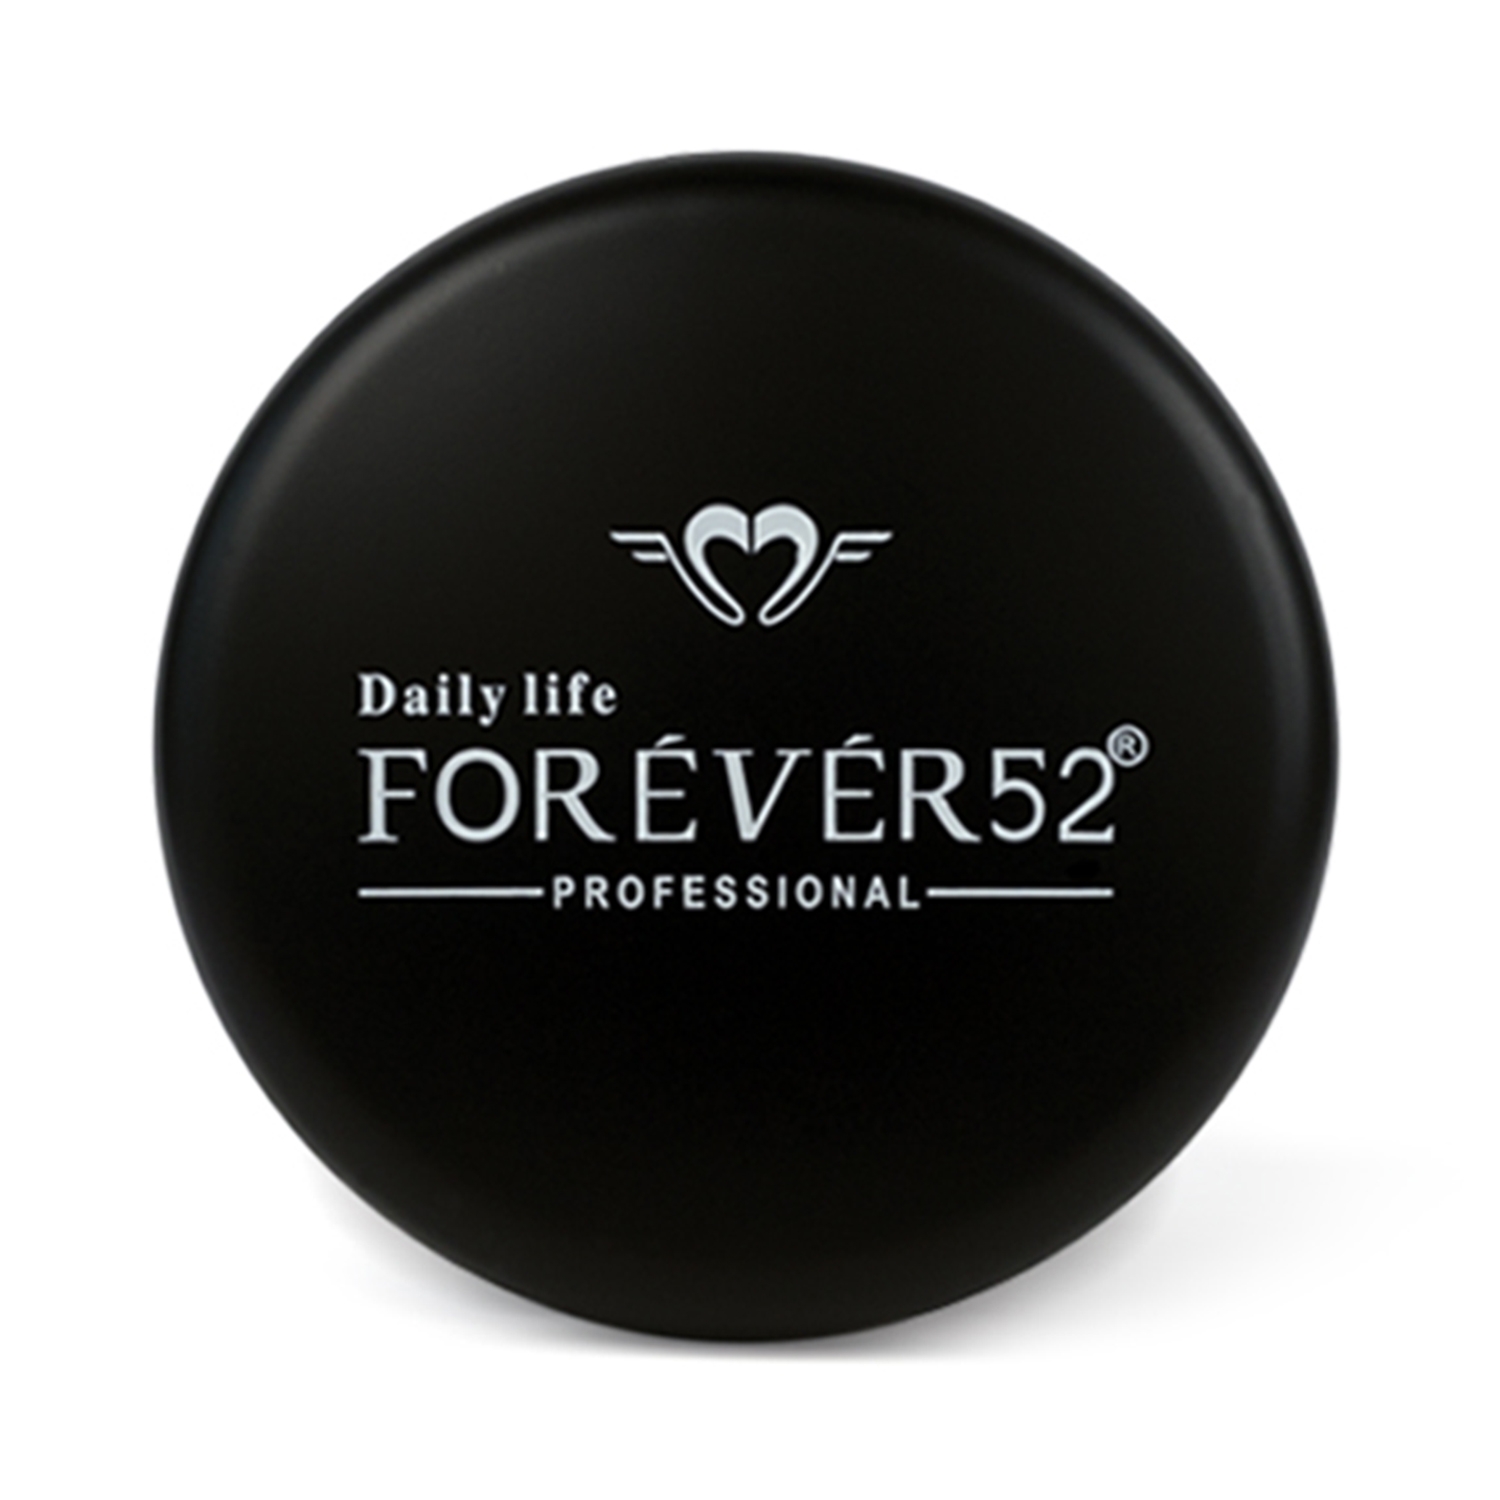 Daily Life Forever52 | Daily Life Forever52 Two Way Cake Compact Powder - A008 Rose Biege (12g)